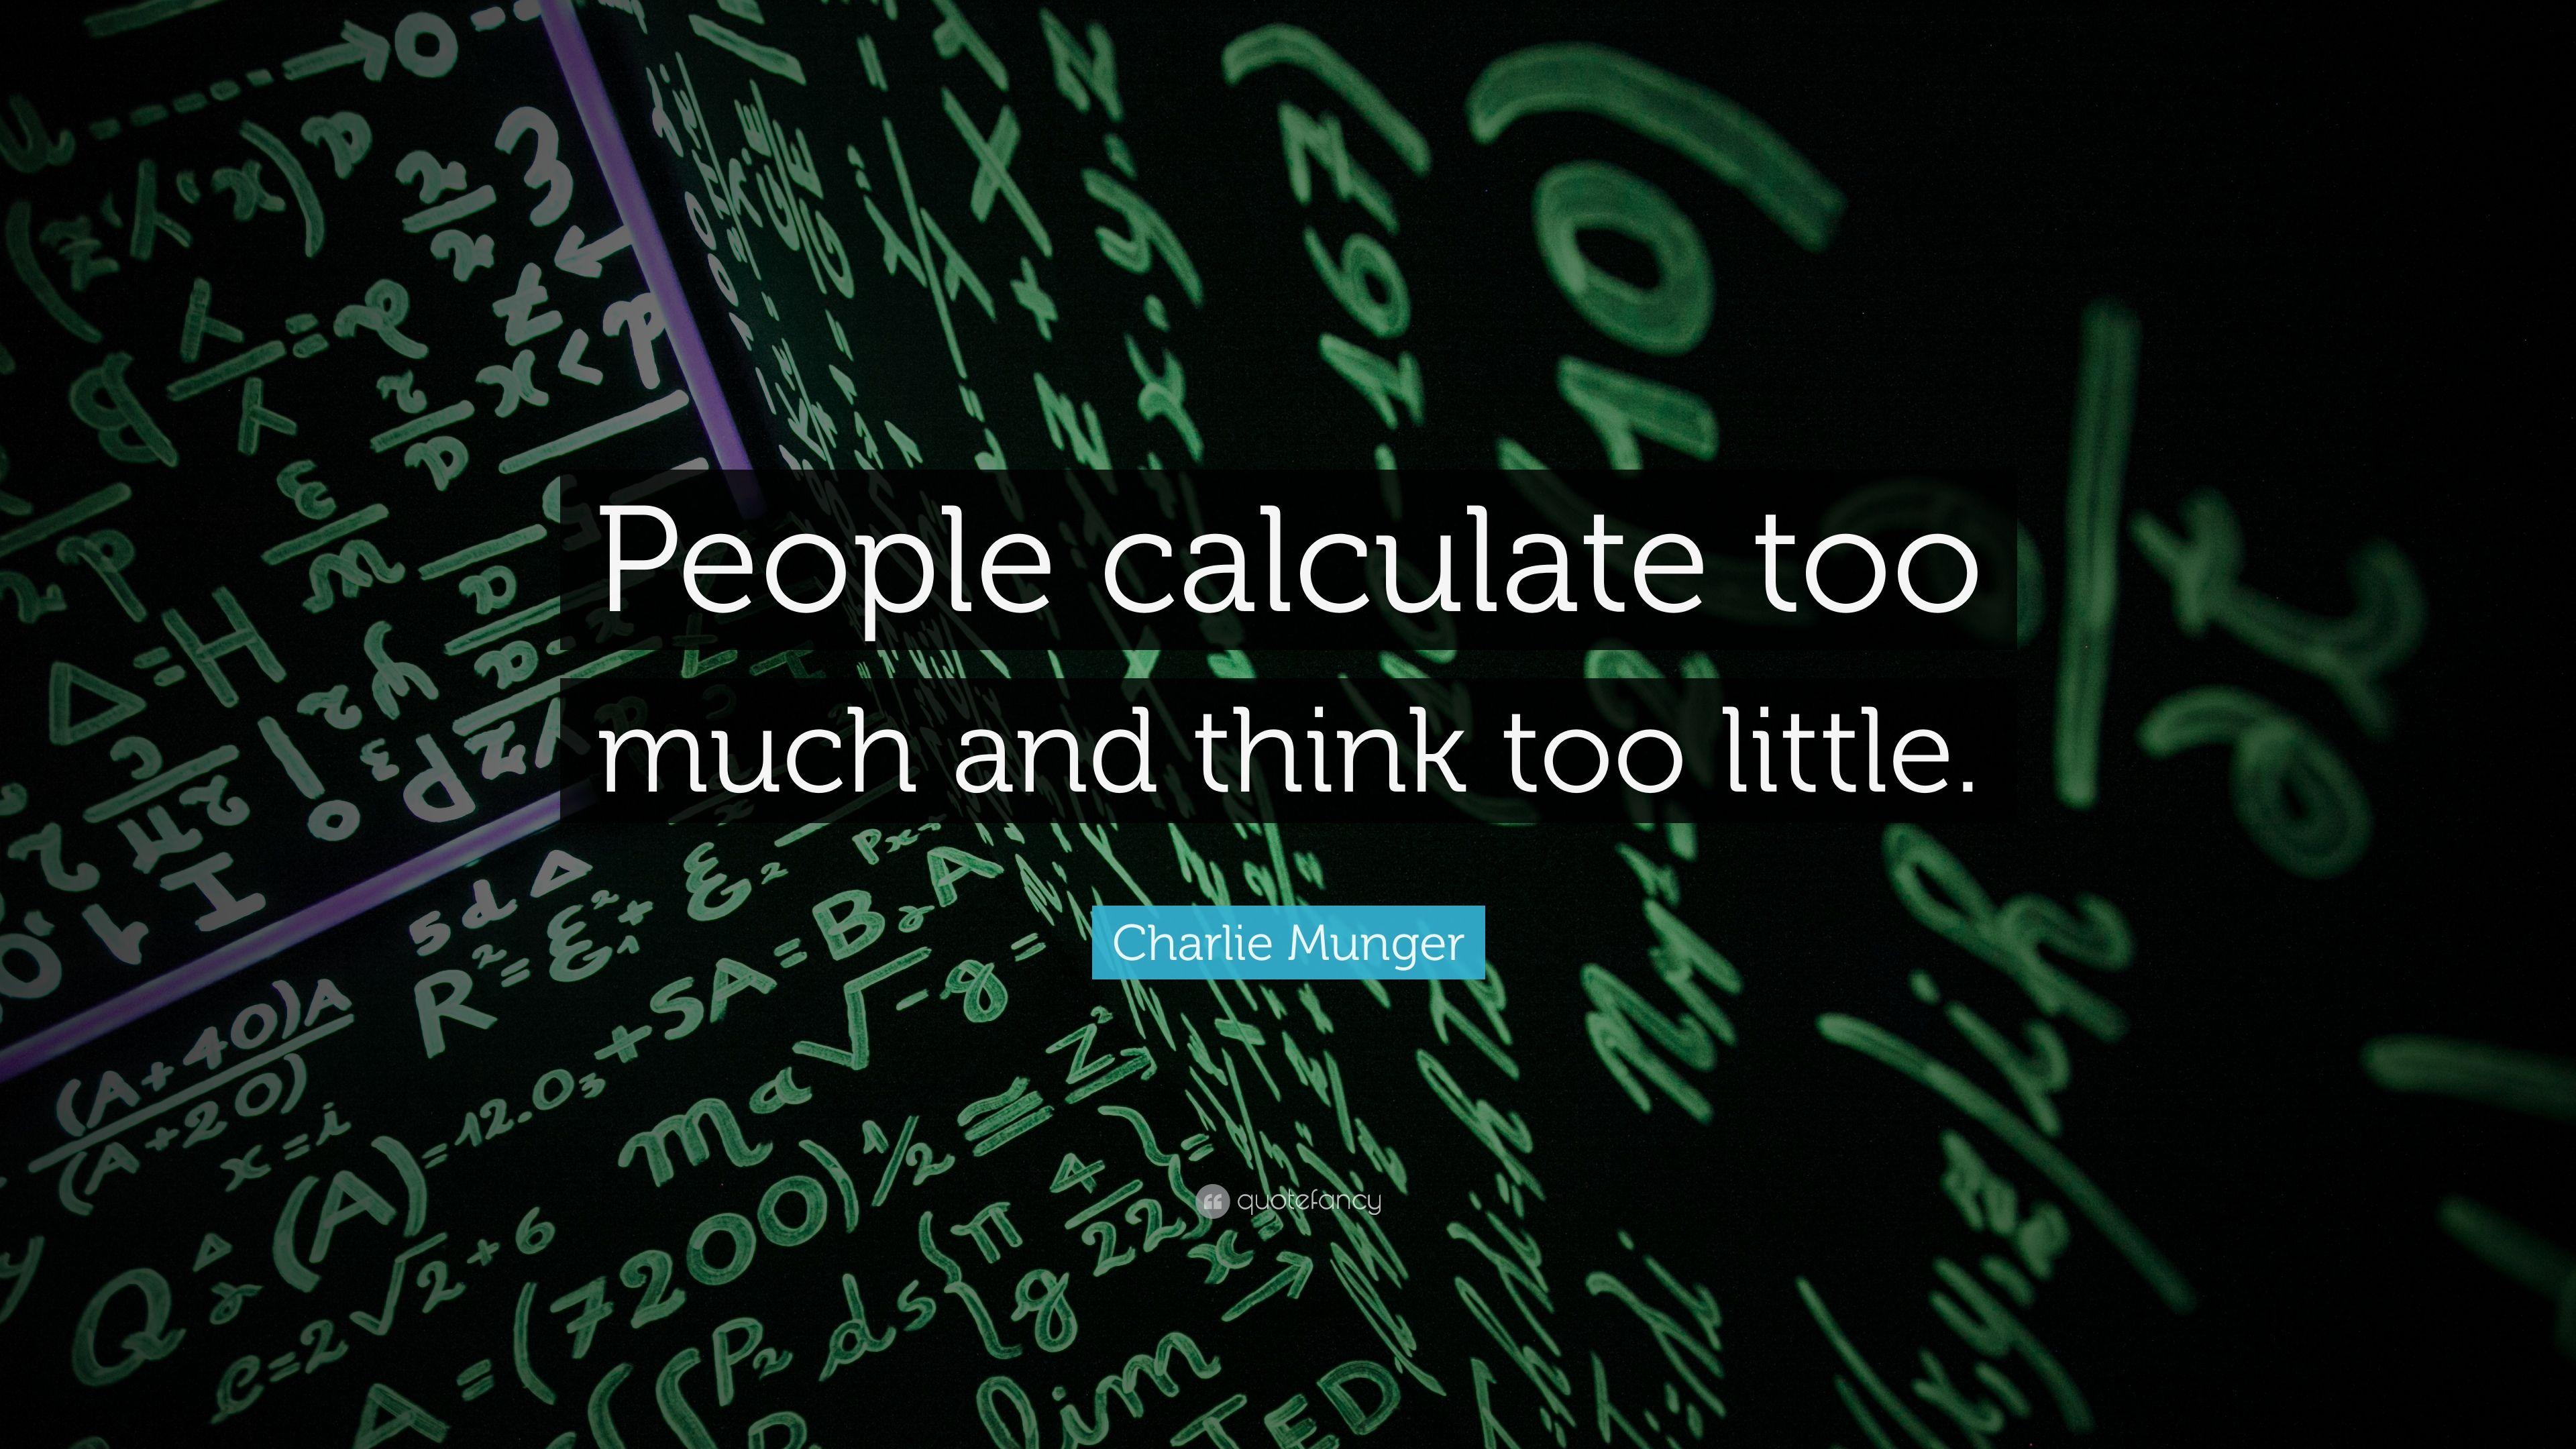 Charlie Munger Quote: “People calculate too much and think too